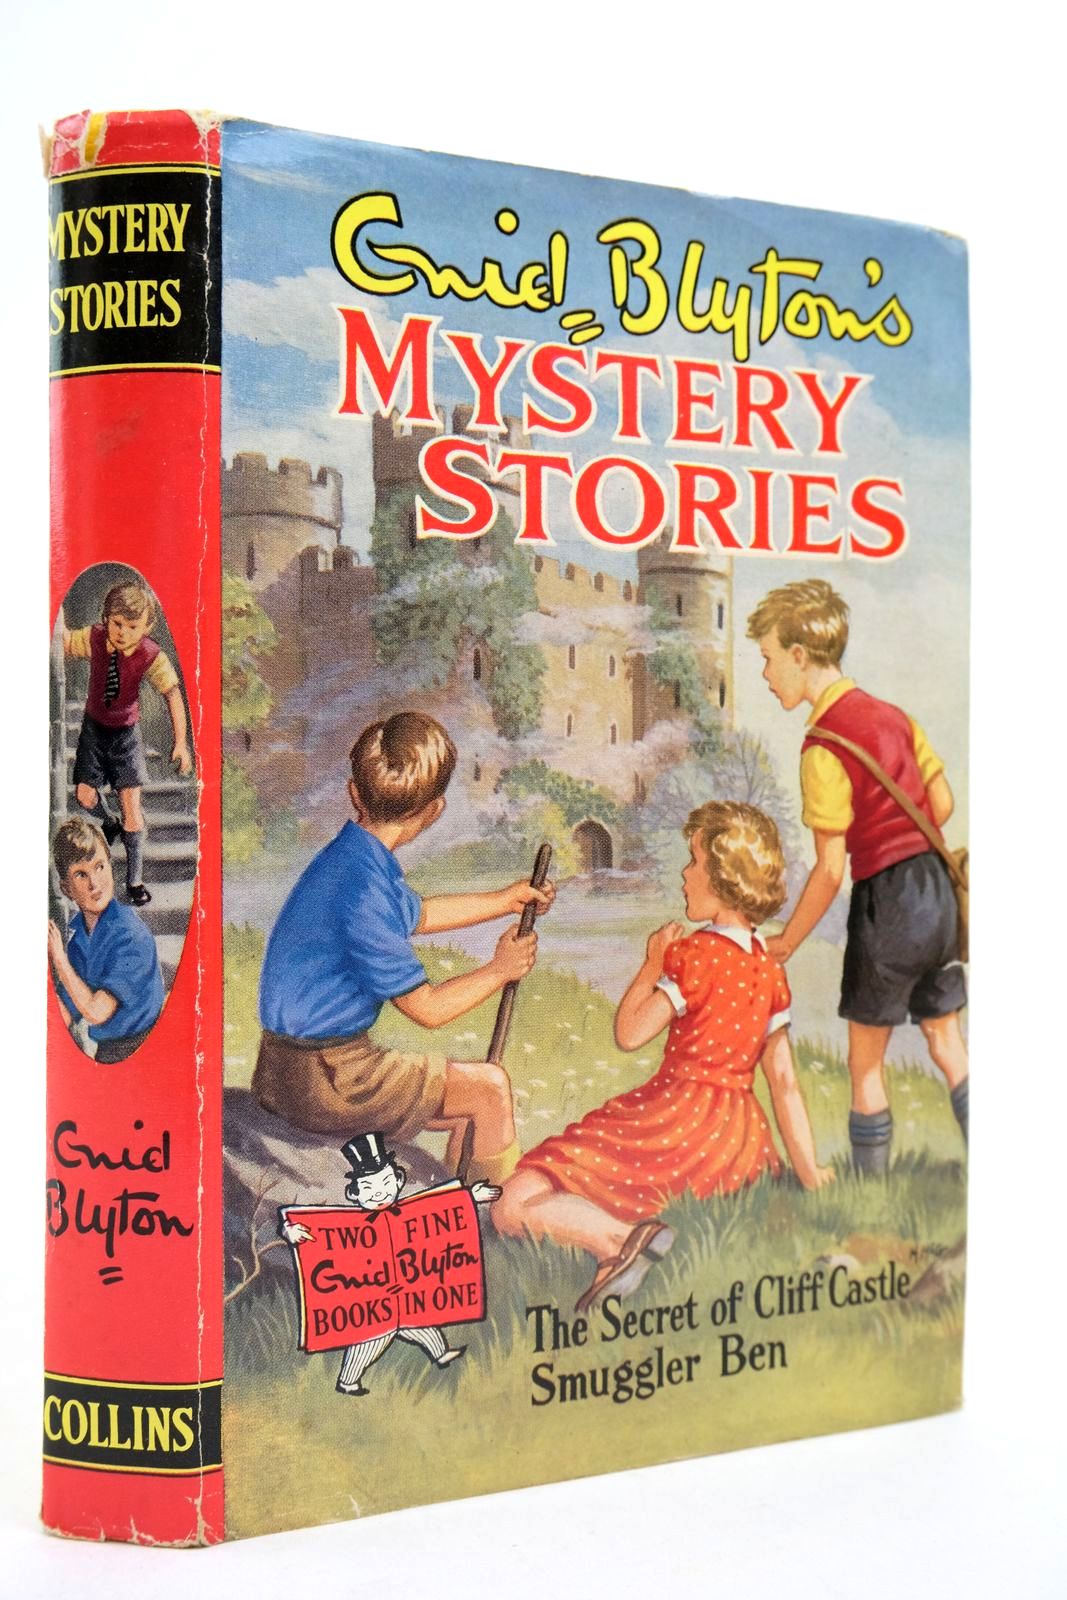 Photo of ENID BLYTON'S MYSTERY STORIES written by Blyton, Enid published by Collins (STOCK CODE: 2140454)  for sale by Stella & Rose's Books